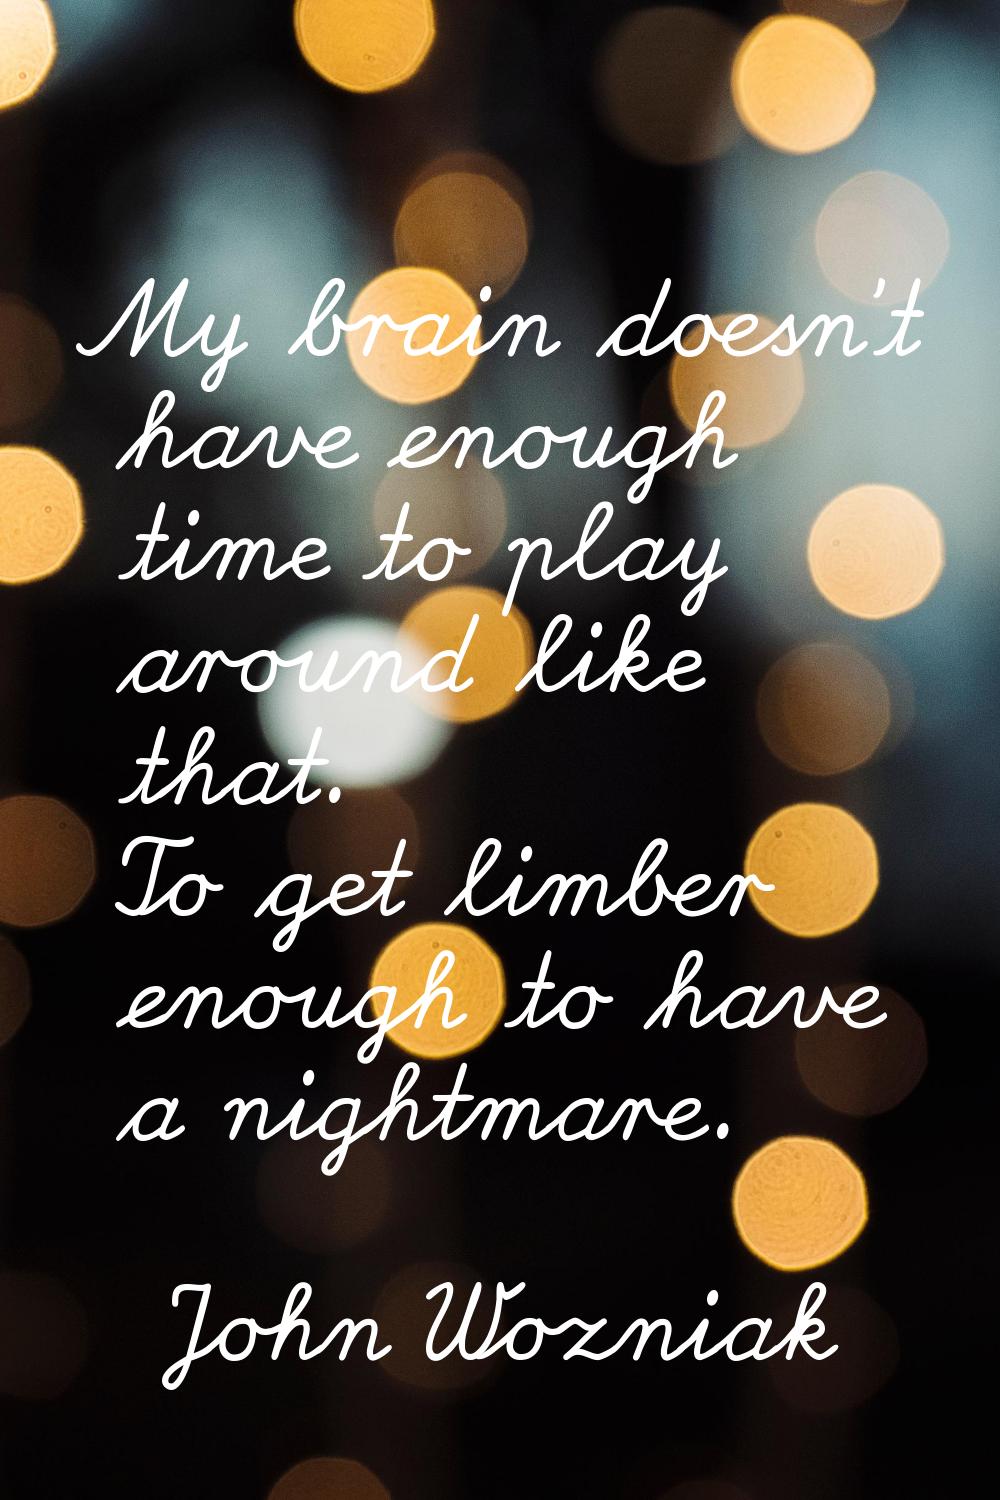 My brain doesn't have enough time to play around like that. To get limber enough to have a nightmar